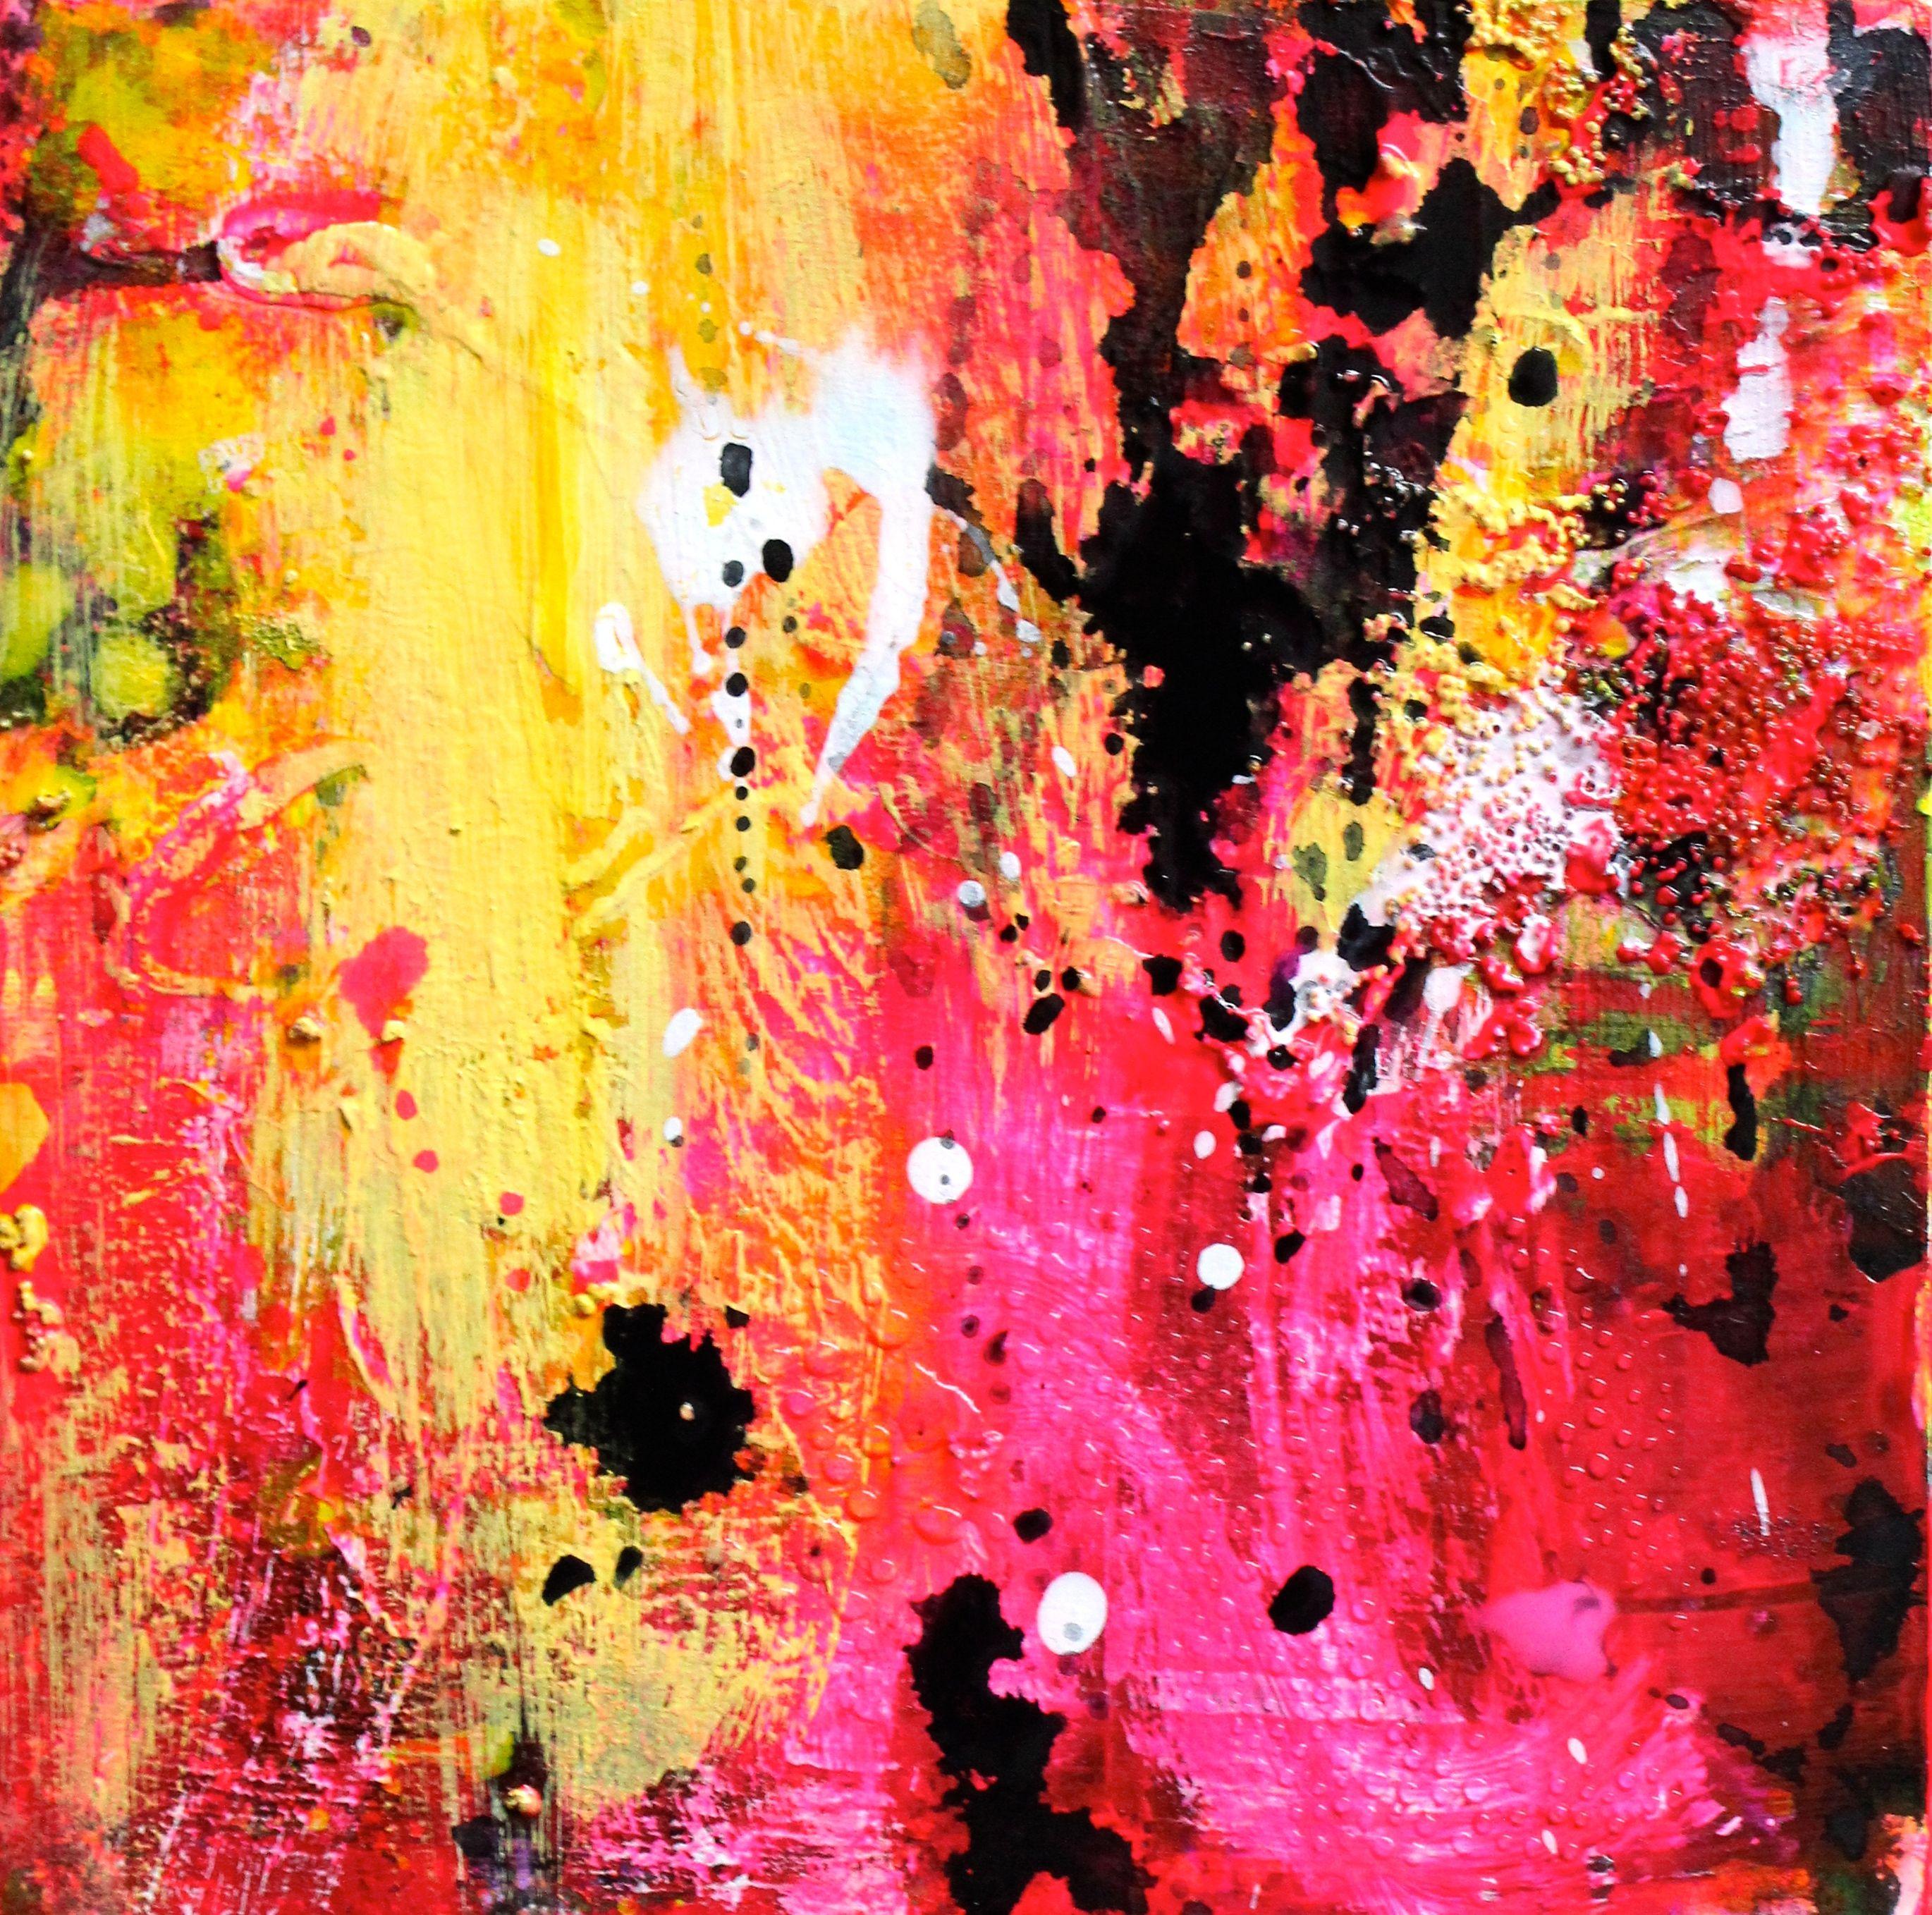 Shine Bright 3 !, Mixed Media on MDF Panel - Abstract Mixed Media Art by Laura Spring